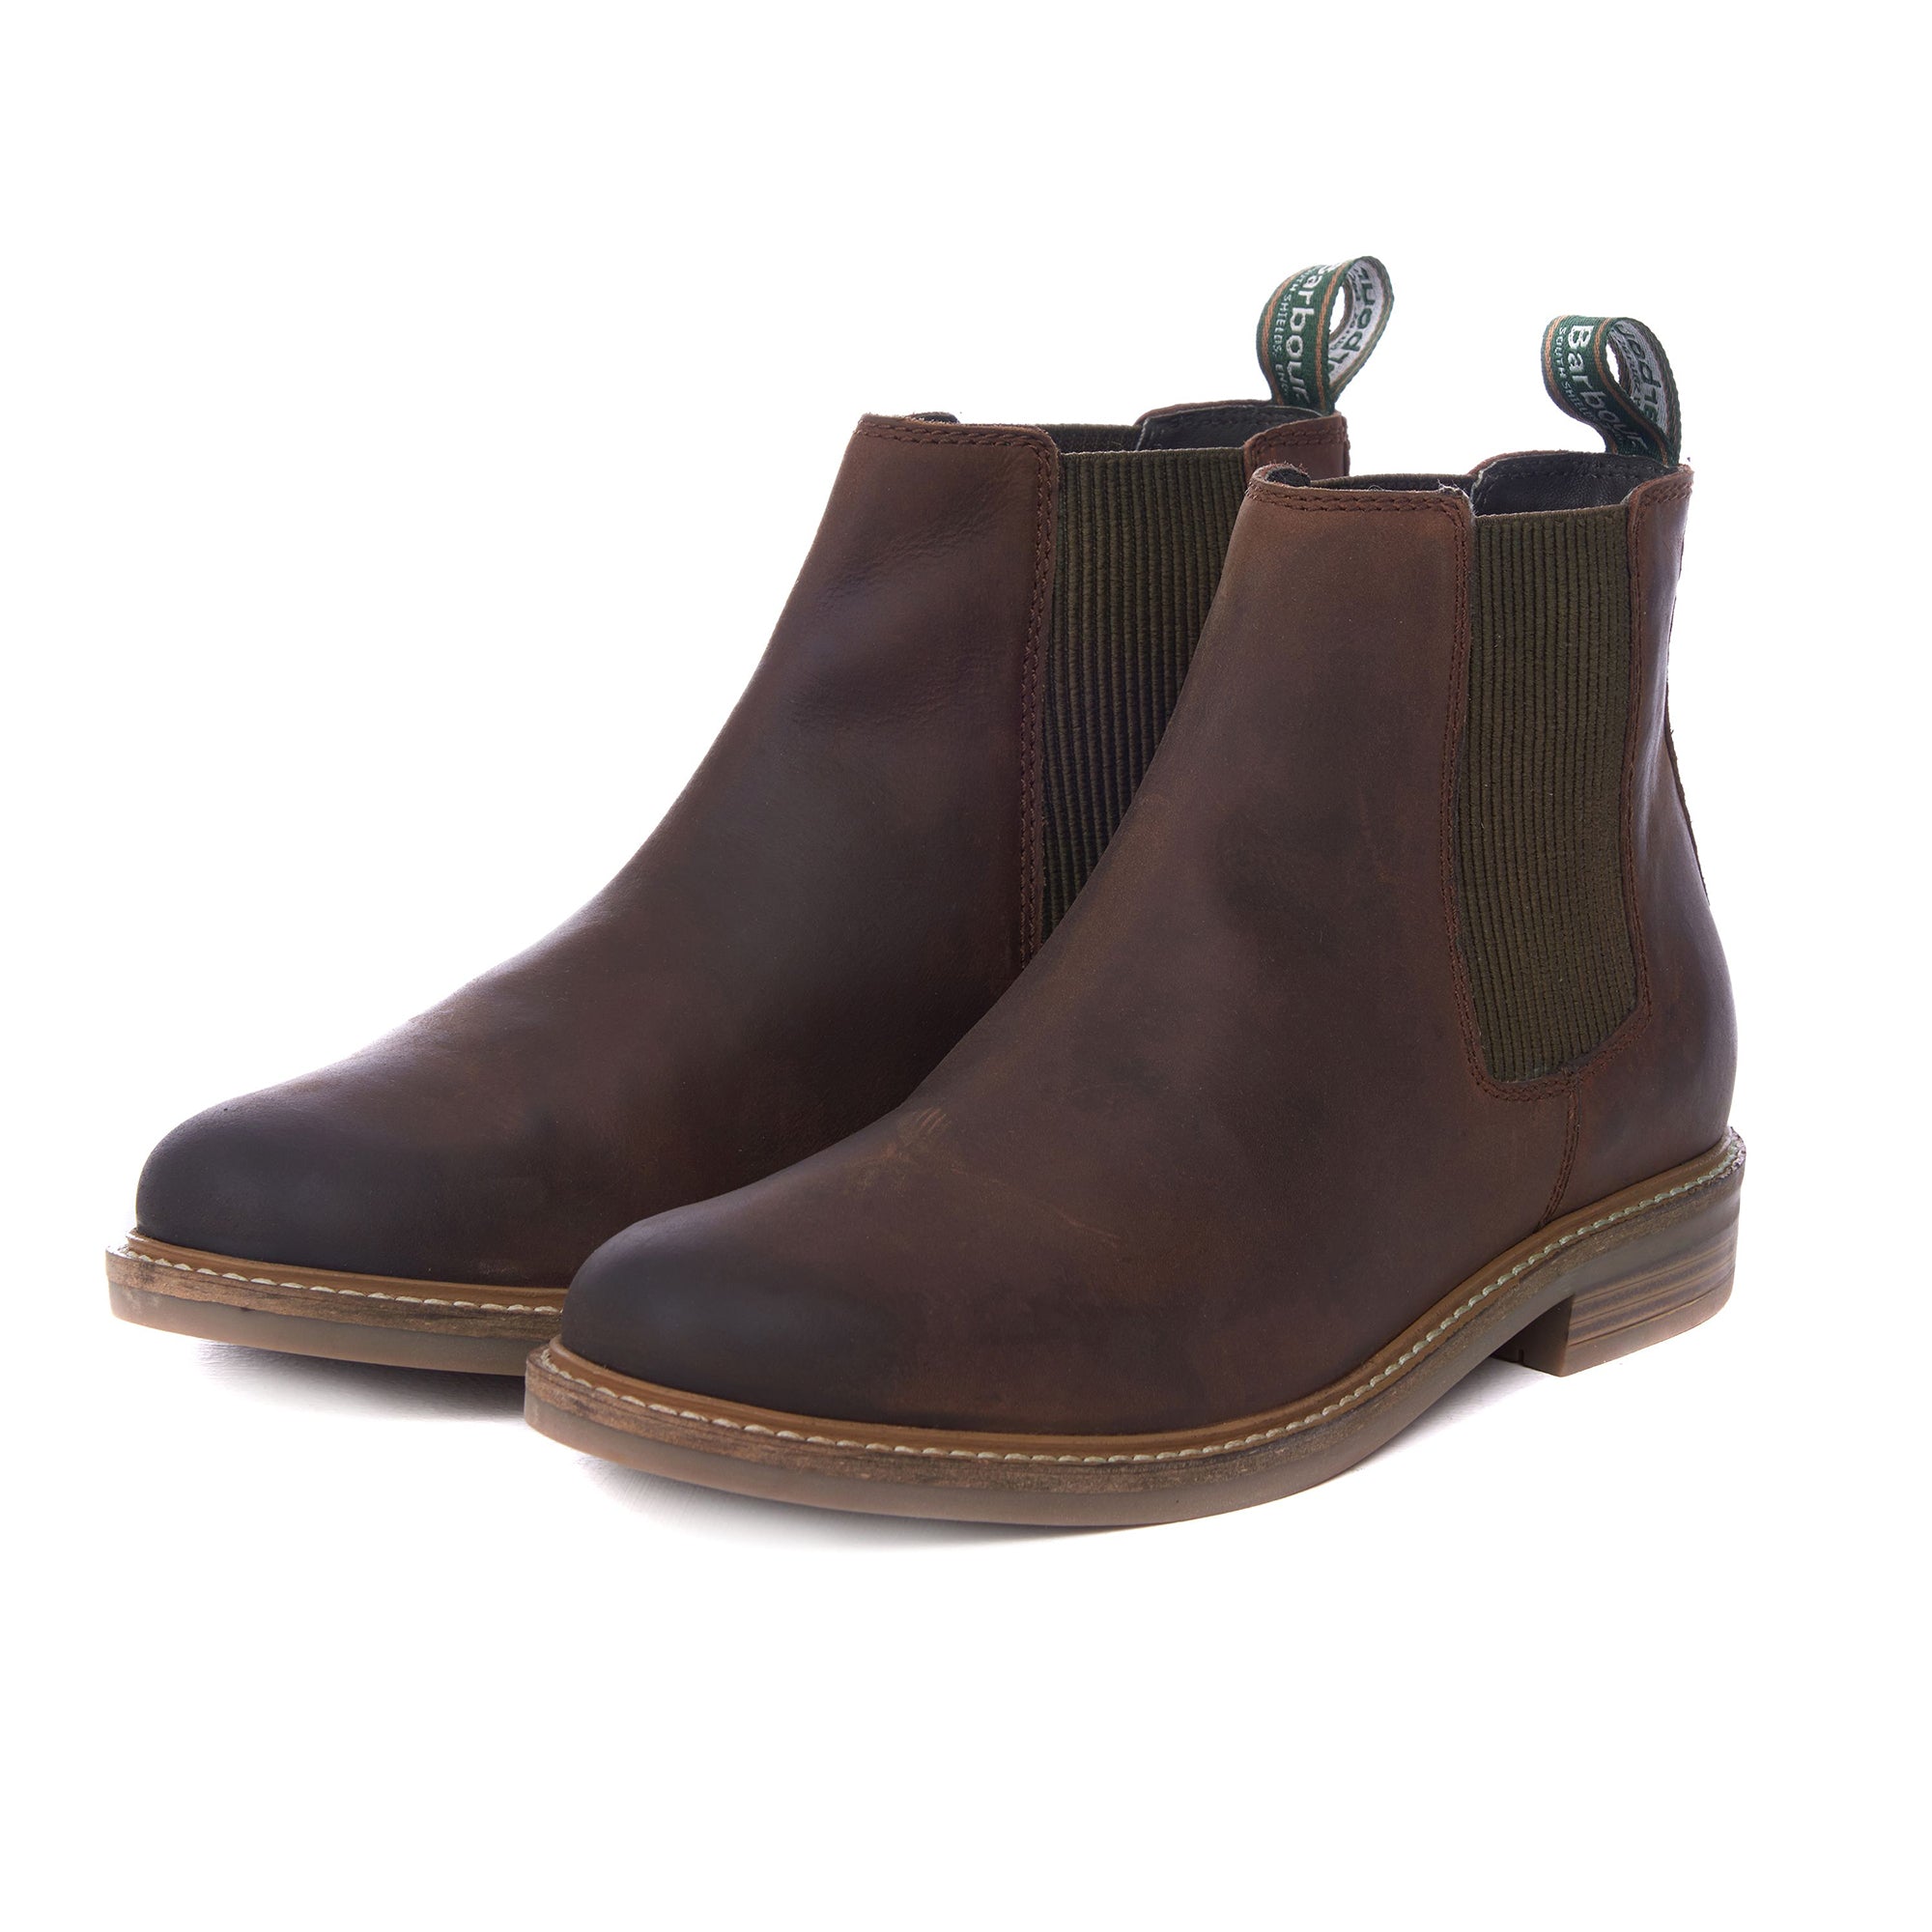 Barbour Farsley Chelsea Boot - Choco Leather